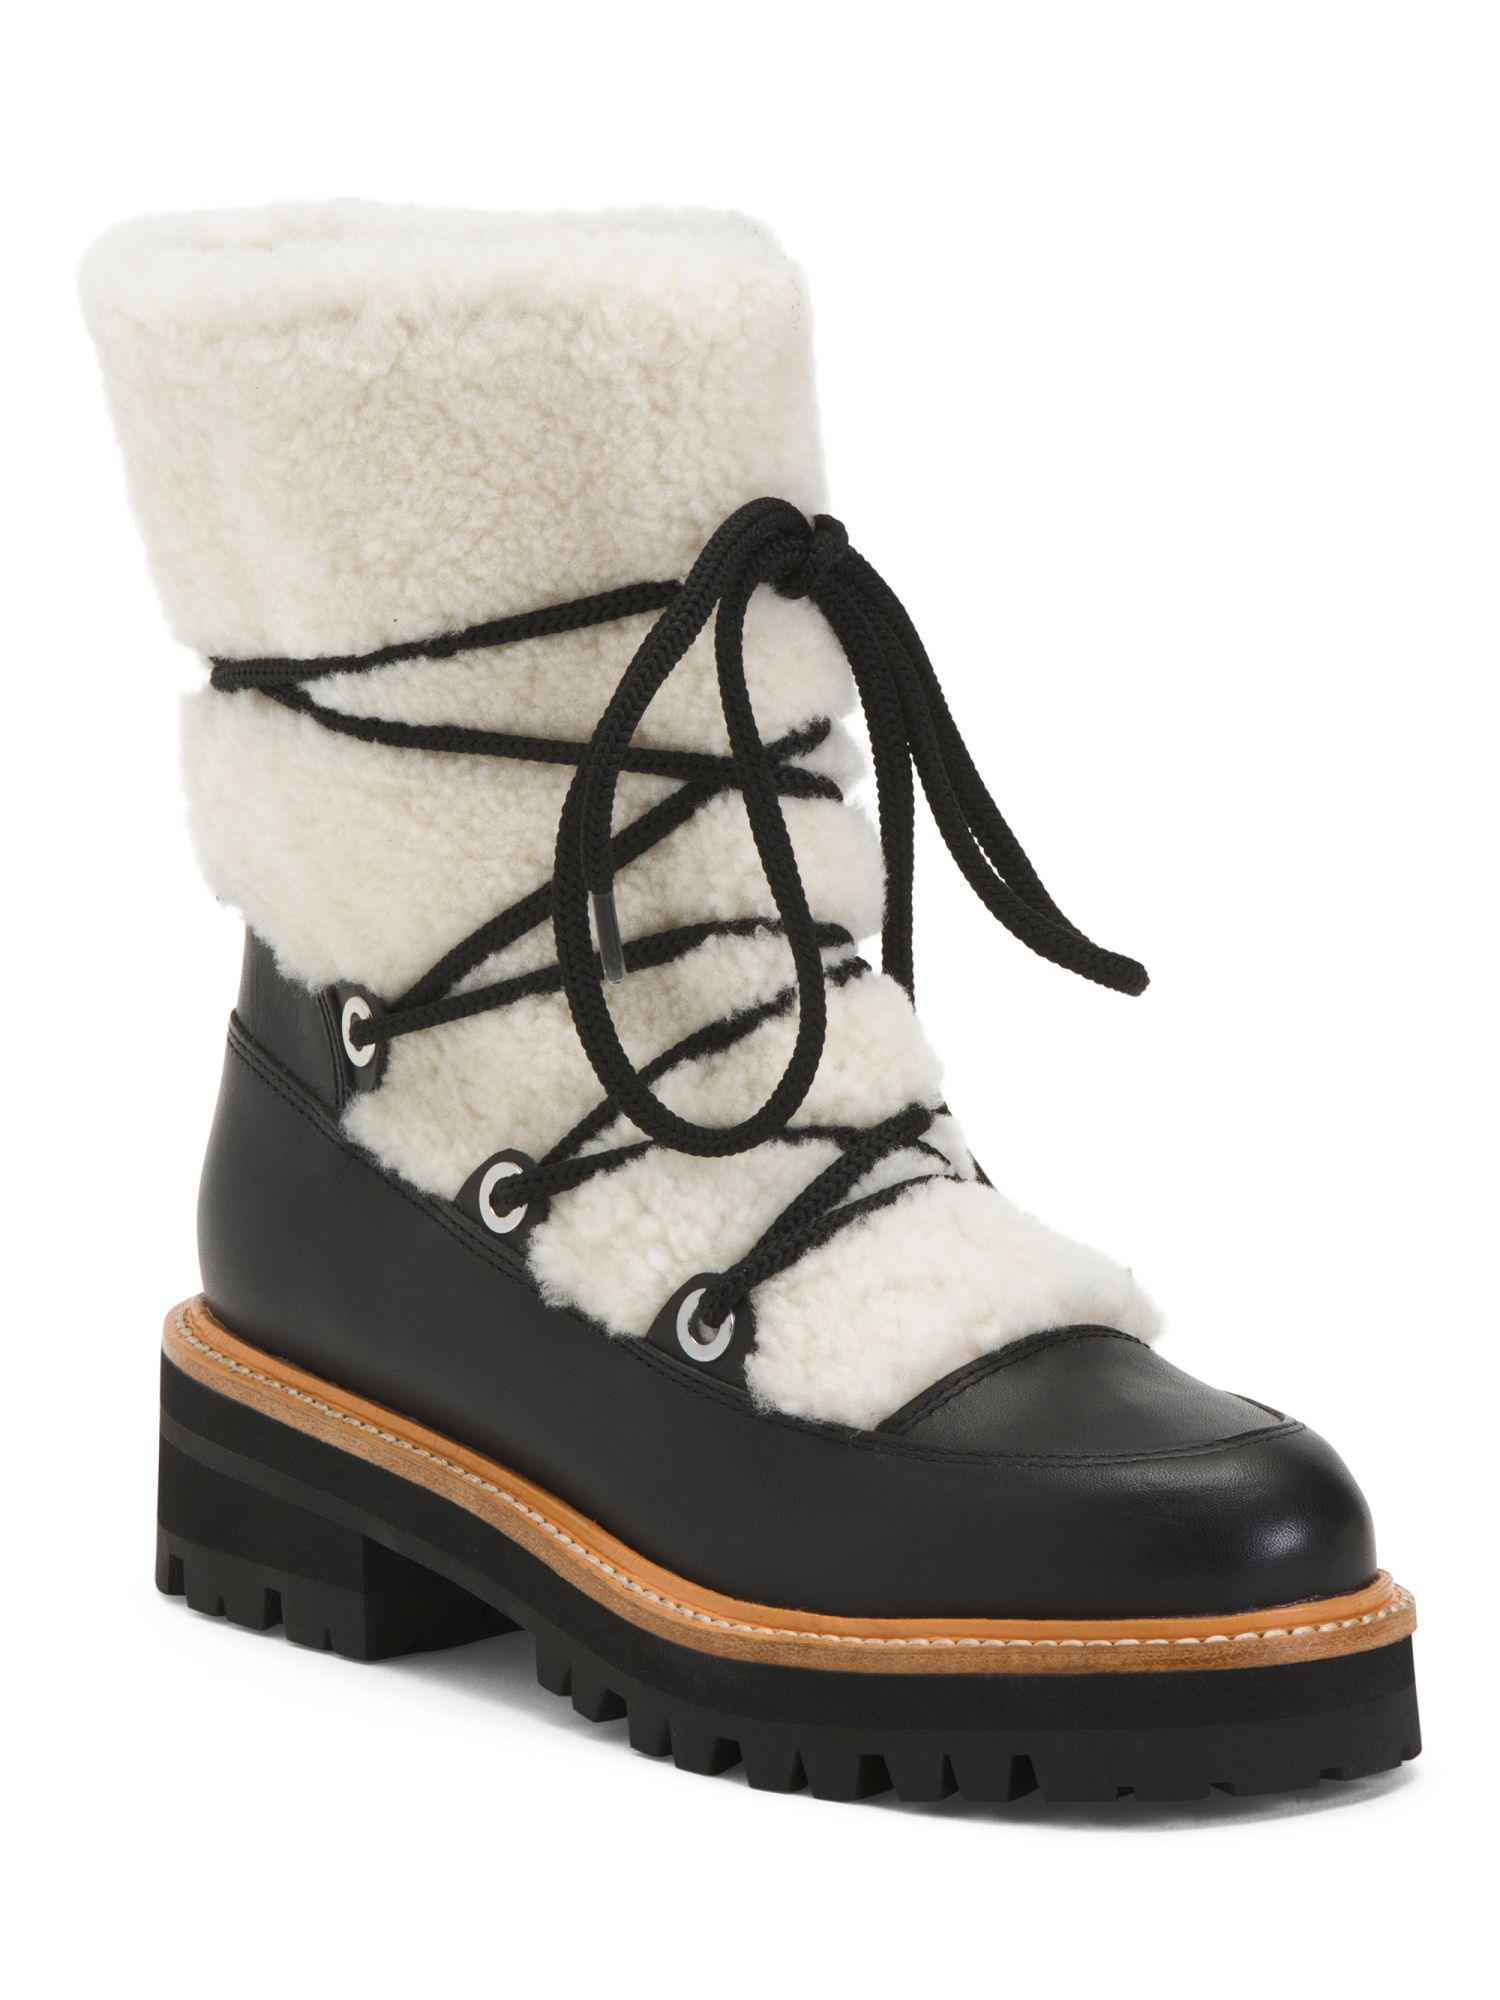 Sherpa And Leather Lug Sole Boots | TJ Maxx